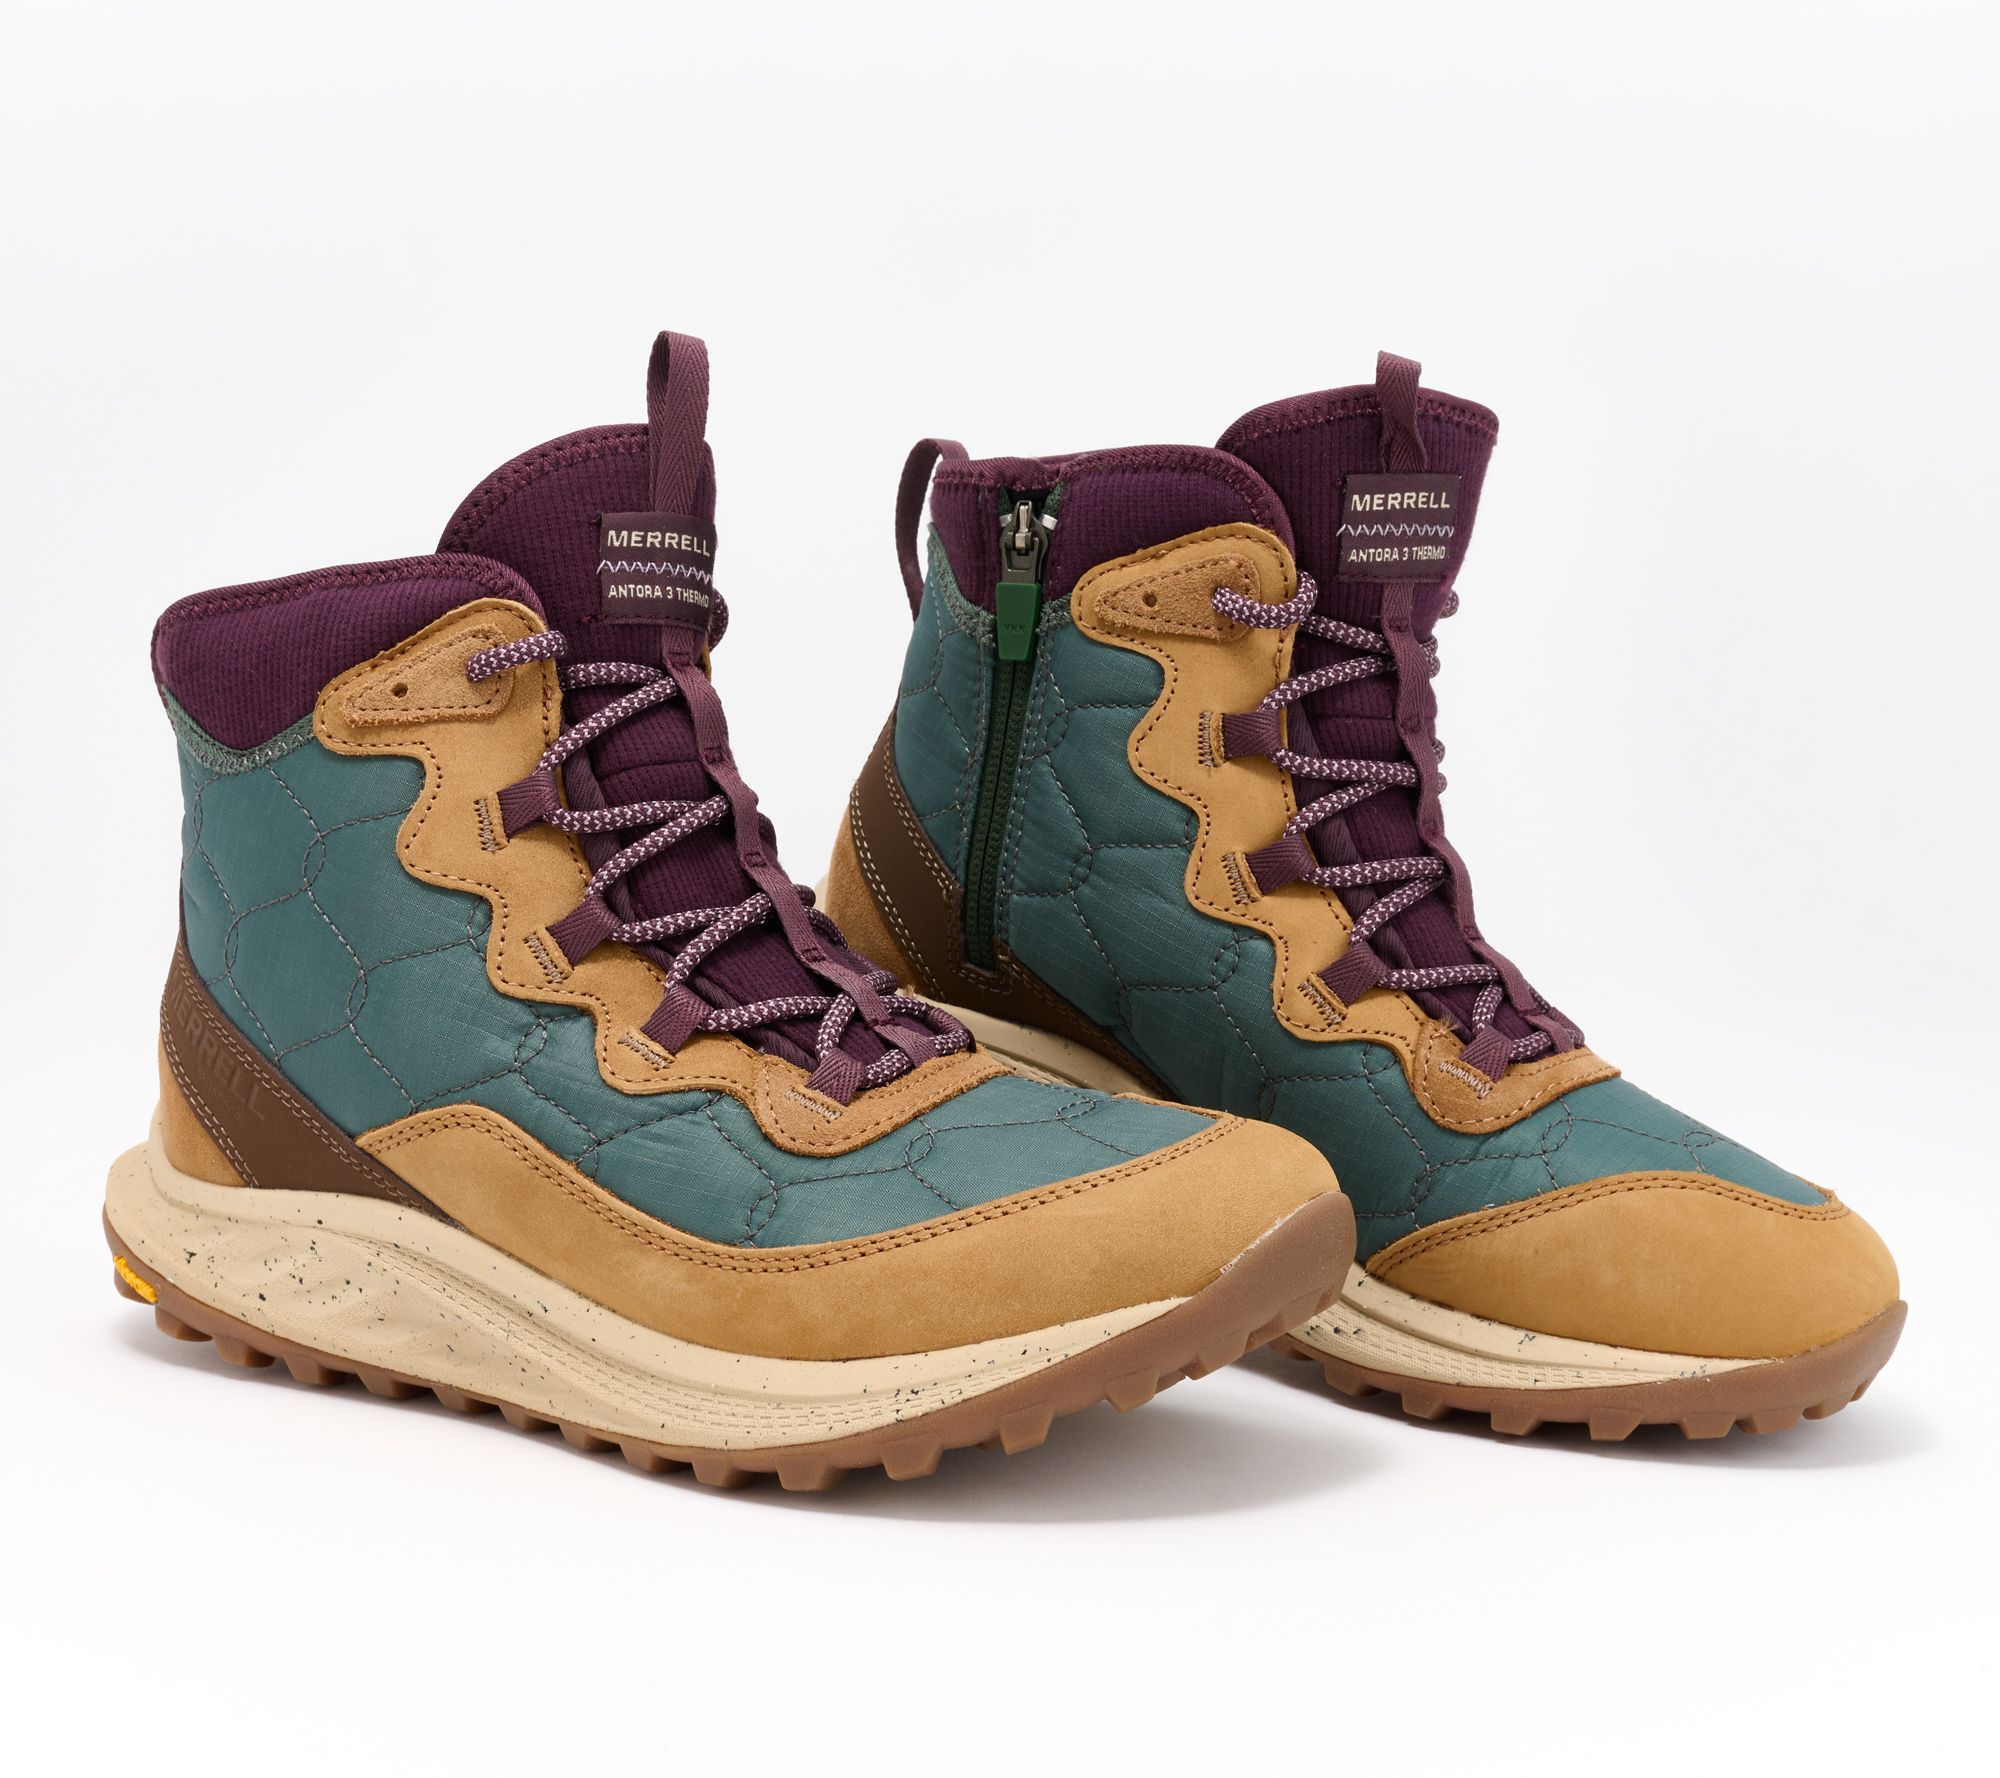 Merrell Waterproof Leather Boots - Antora 3 Thermo Mid - QVC.com